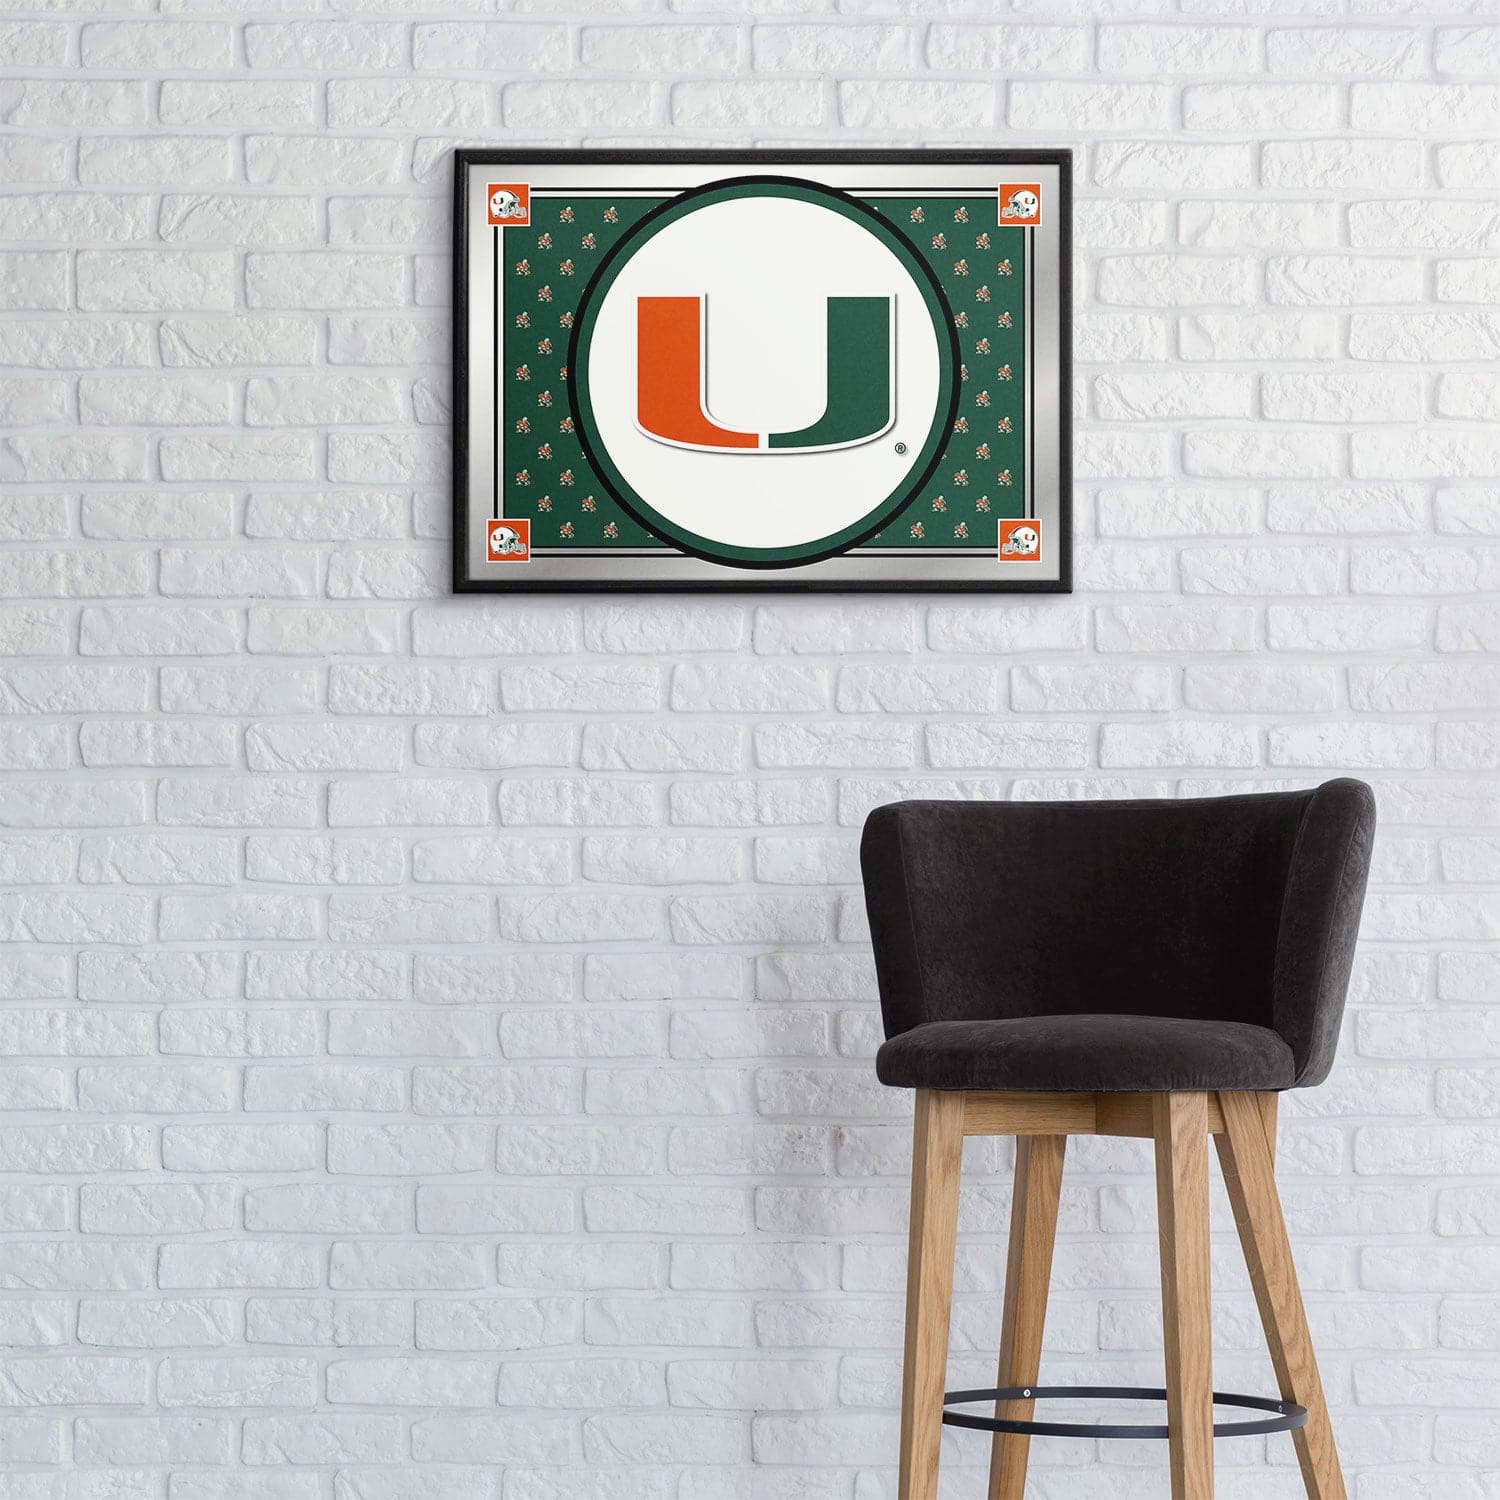 Miami Hurricanes: Team Spirit - Framed Mirrored Wall Sign - The Fan-Brand